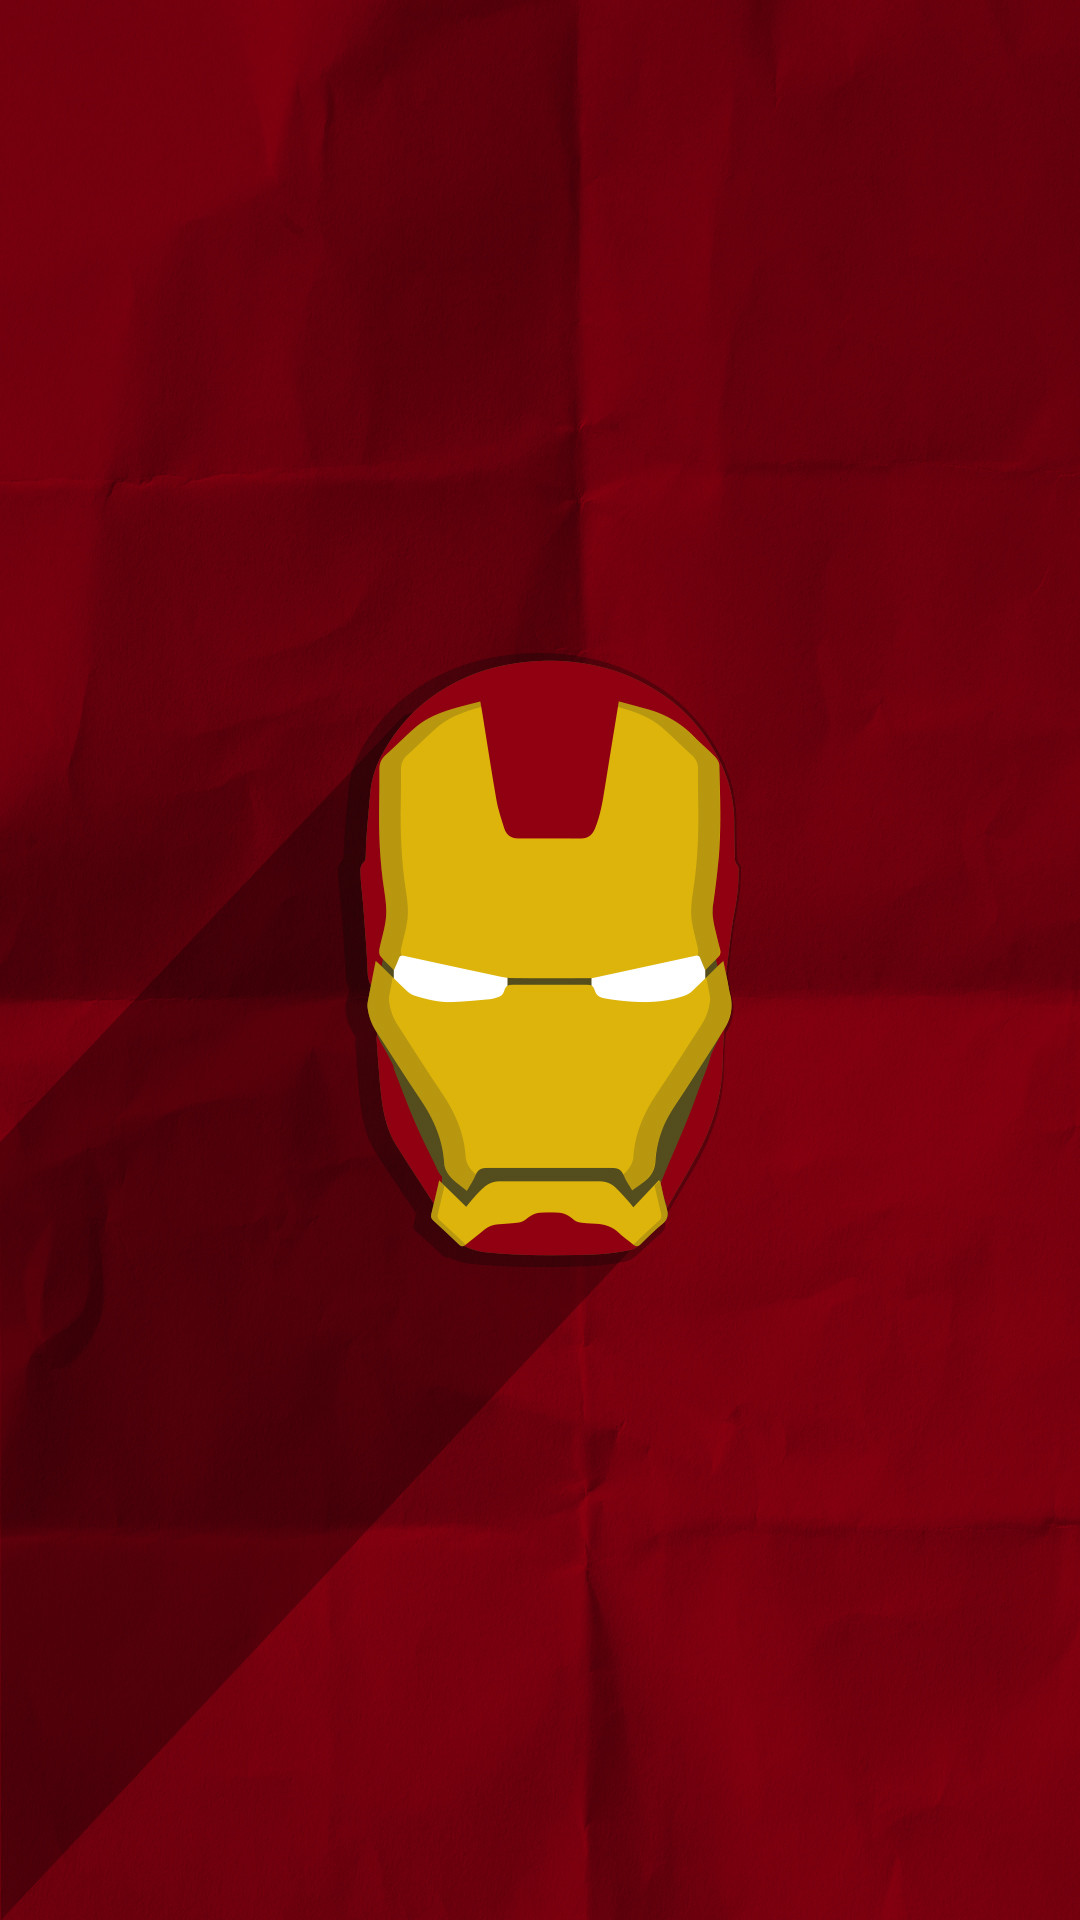 The wallpaper that Tony Stark would use